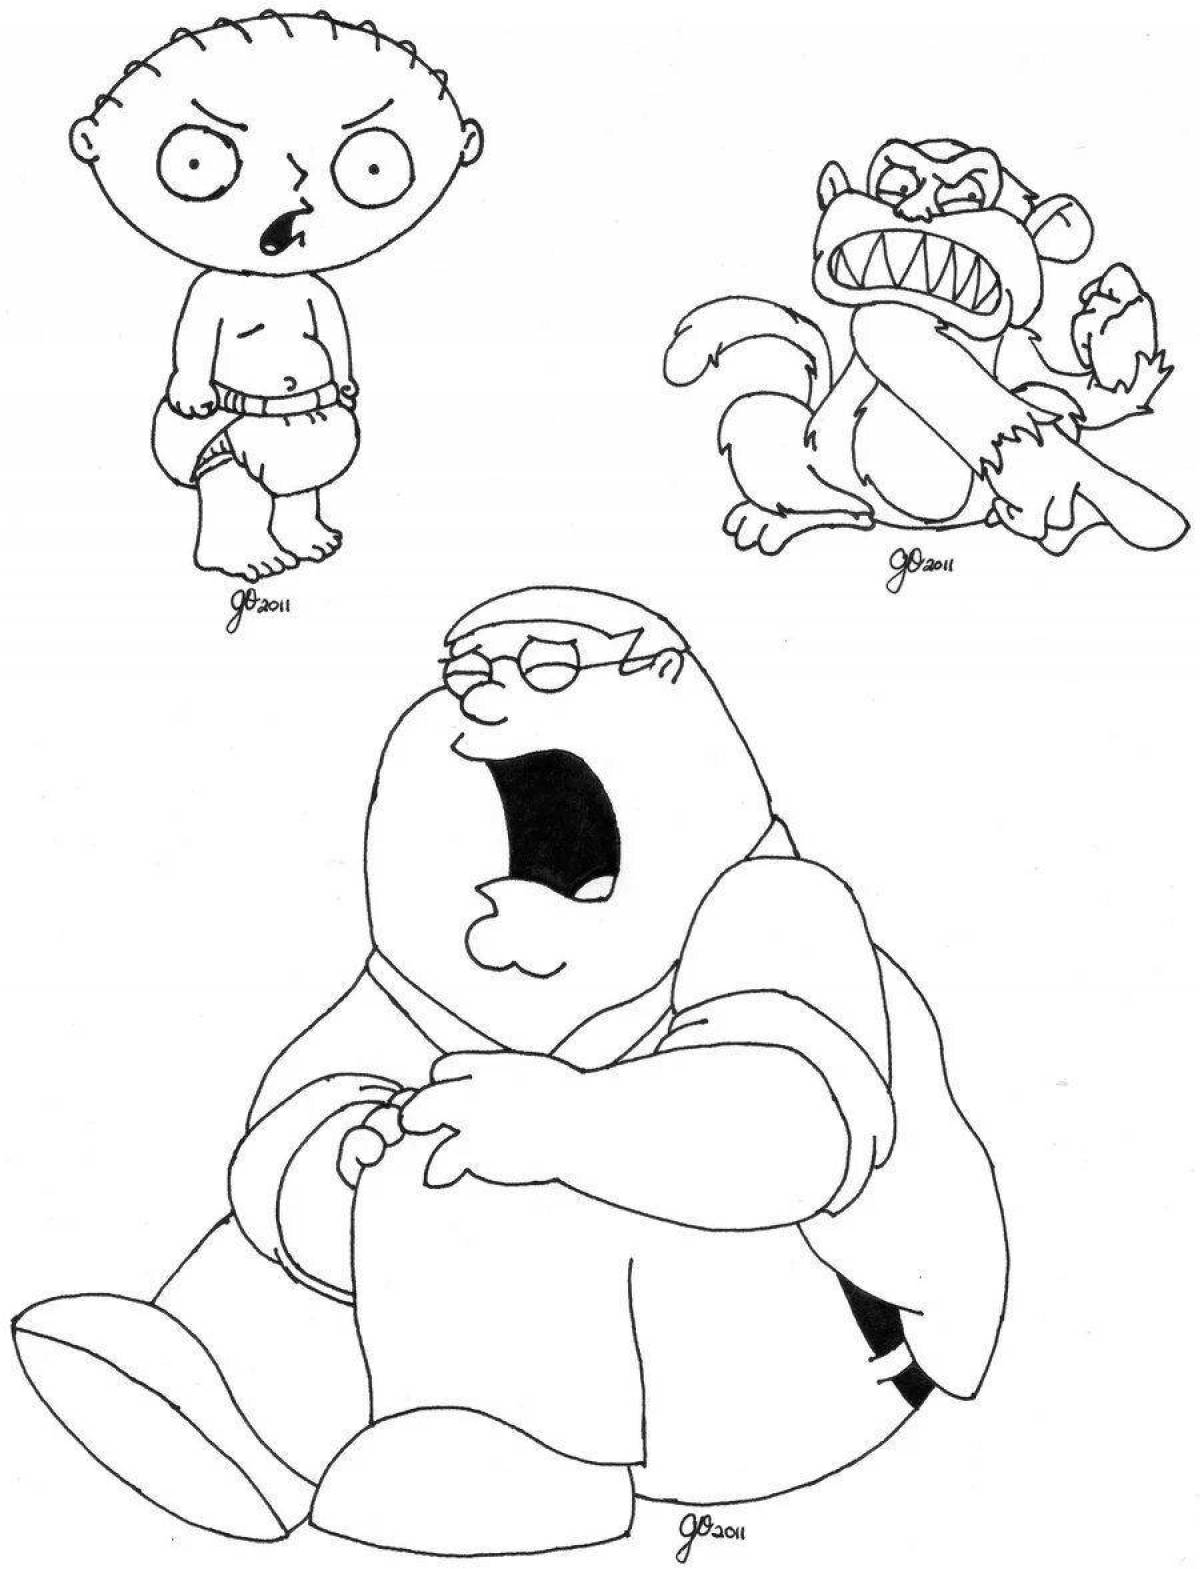 Coloring page lovely peter griffin